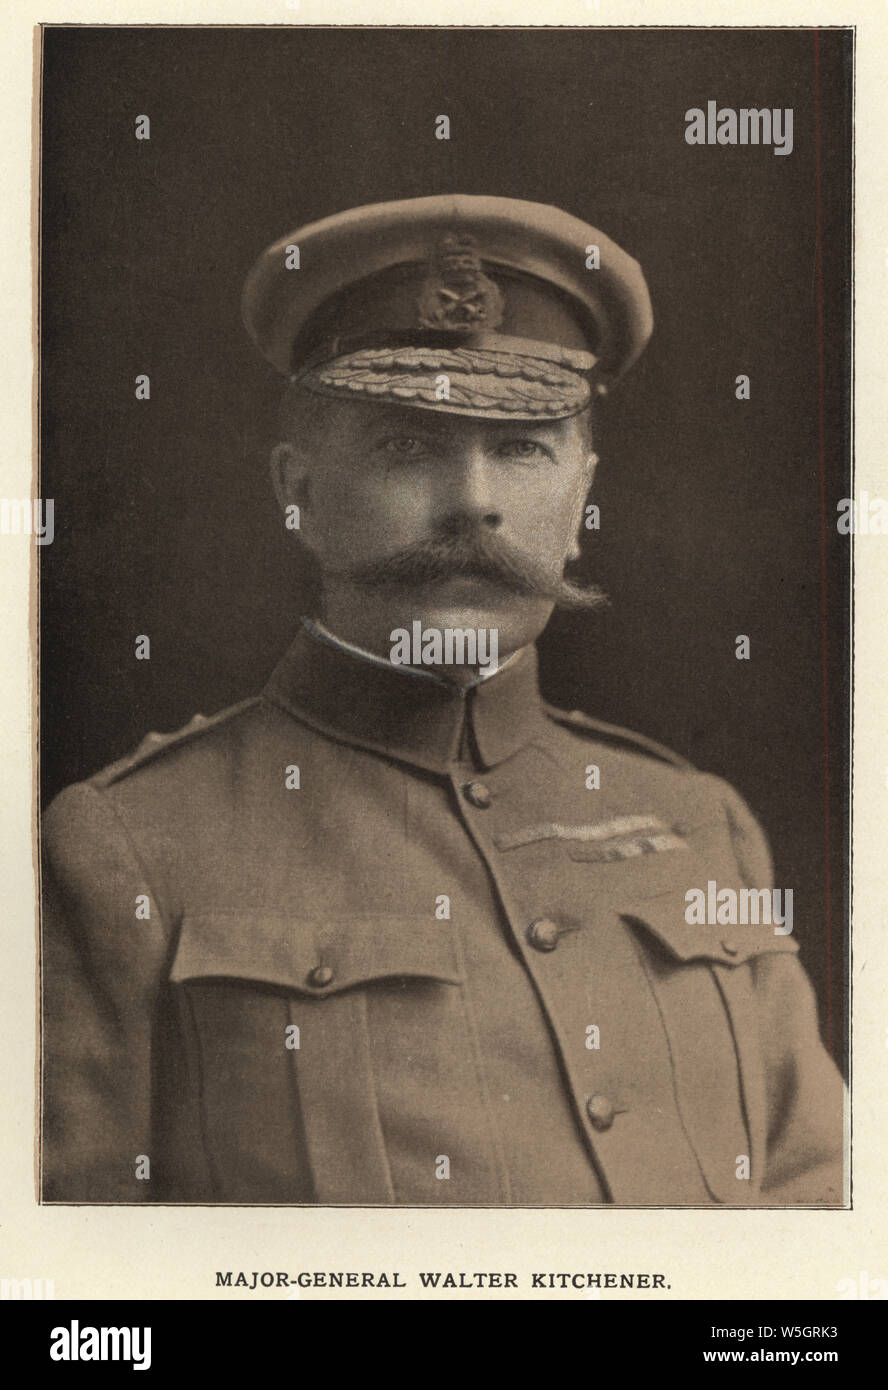 Lieutenant-General Sir Frederick Walter Kitchener KCB (26 May 1858 – 6 March 1912), known as Walter Kitchener, was a British soldier and colonial administrator. Stock Photo